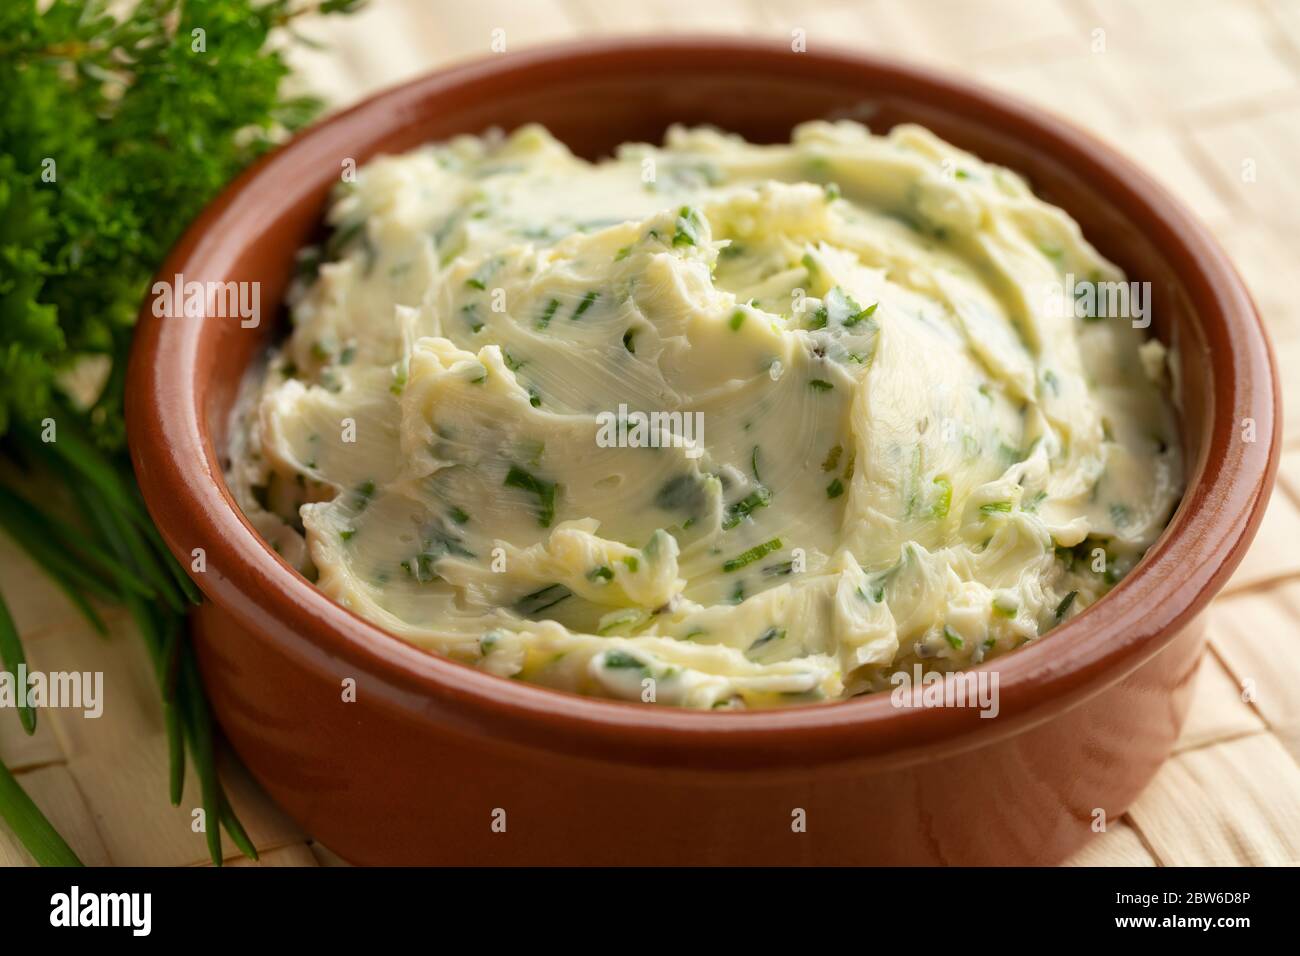 Bowl with fresh made herb butter close up Stock Photo